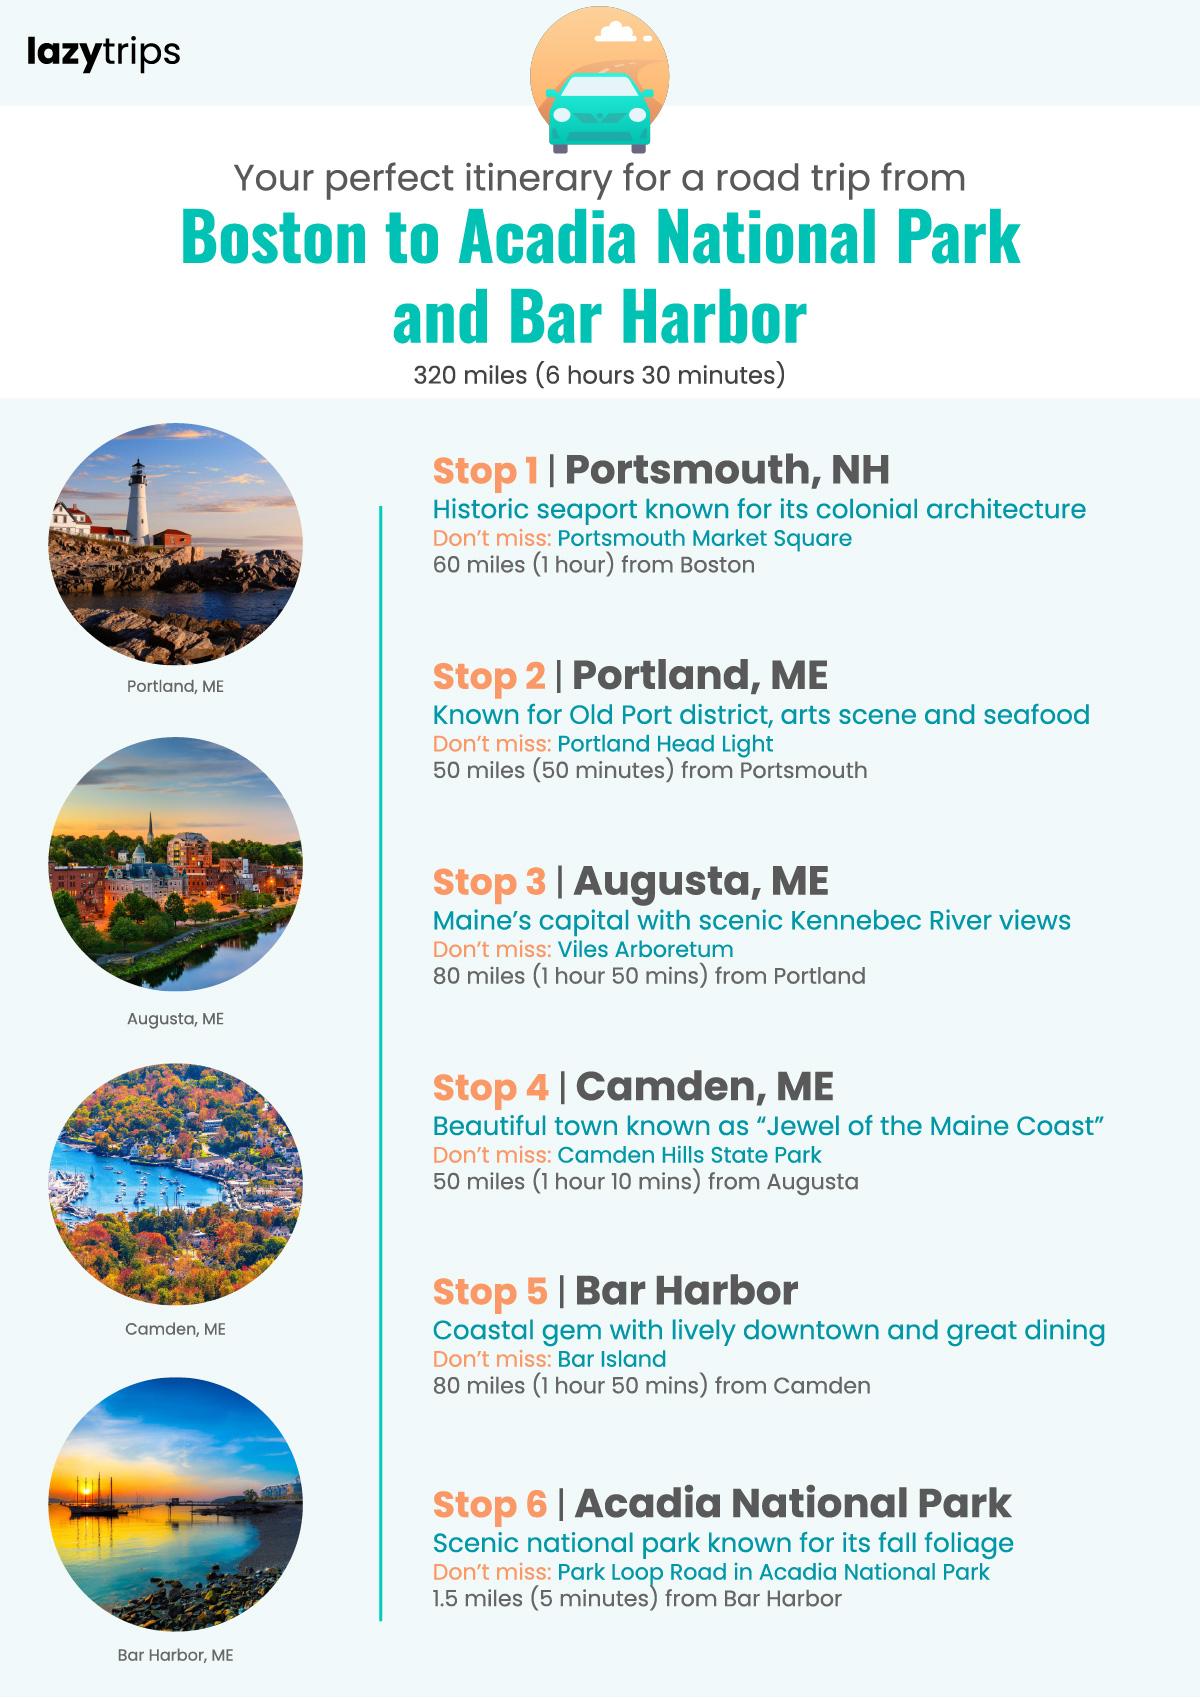 Itinerary for a road trip from Boston to Acadia National Park and Bar Harbor , stopping in Portsmouth, Portland, Augusta, Camden, Bar Harbor, Acadia National Park